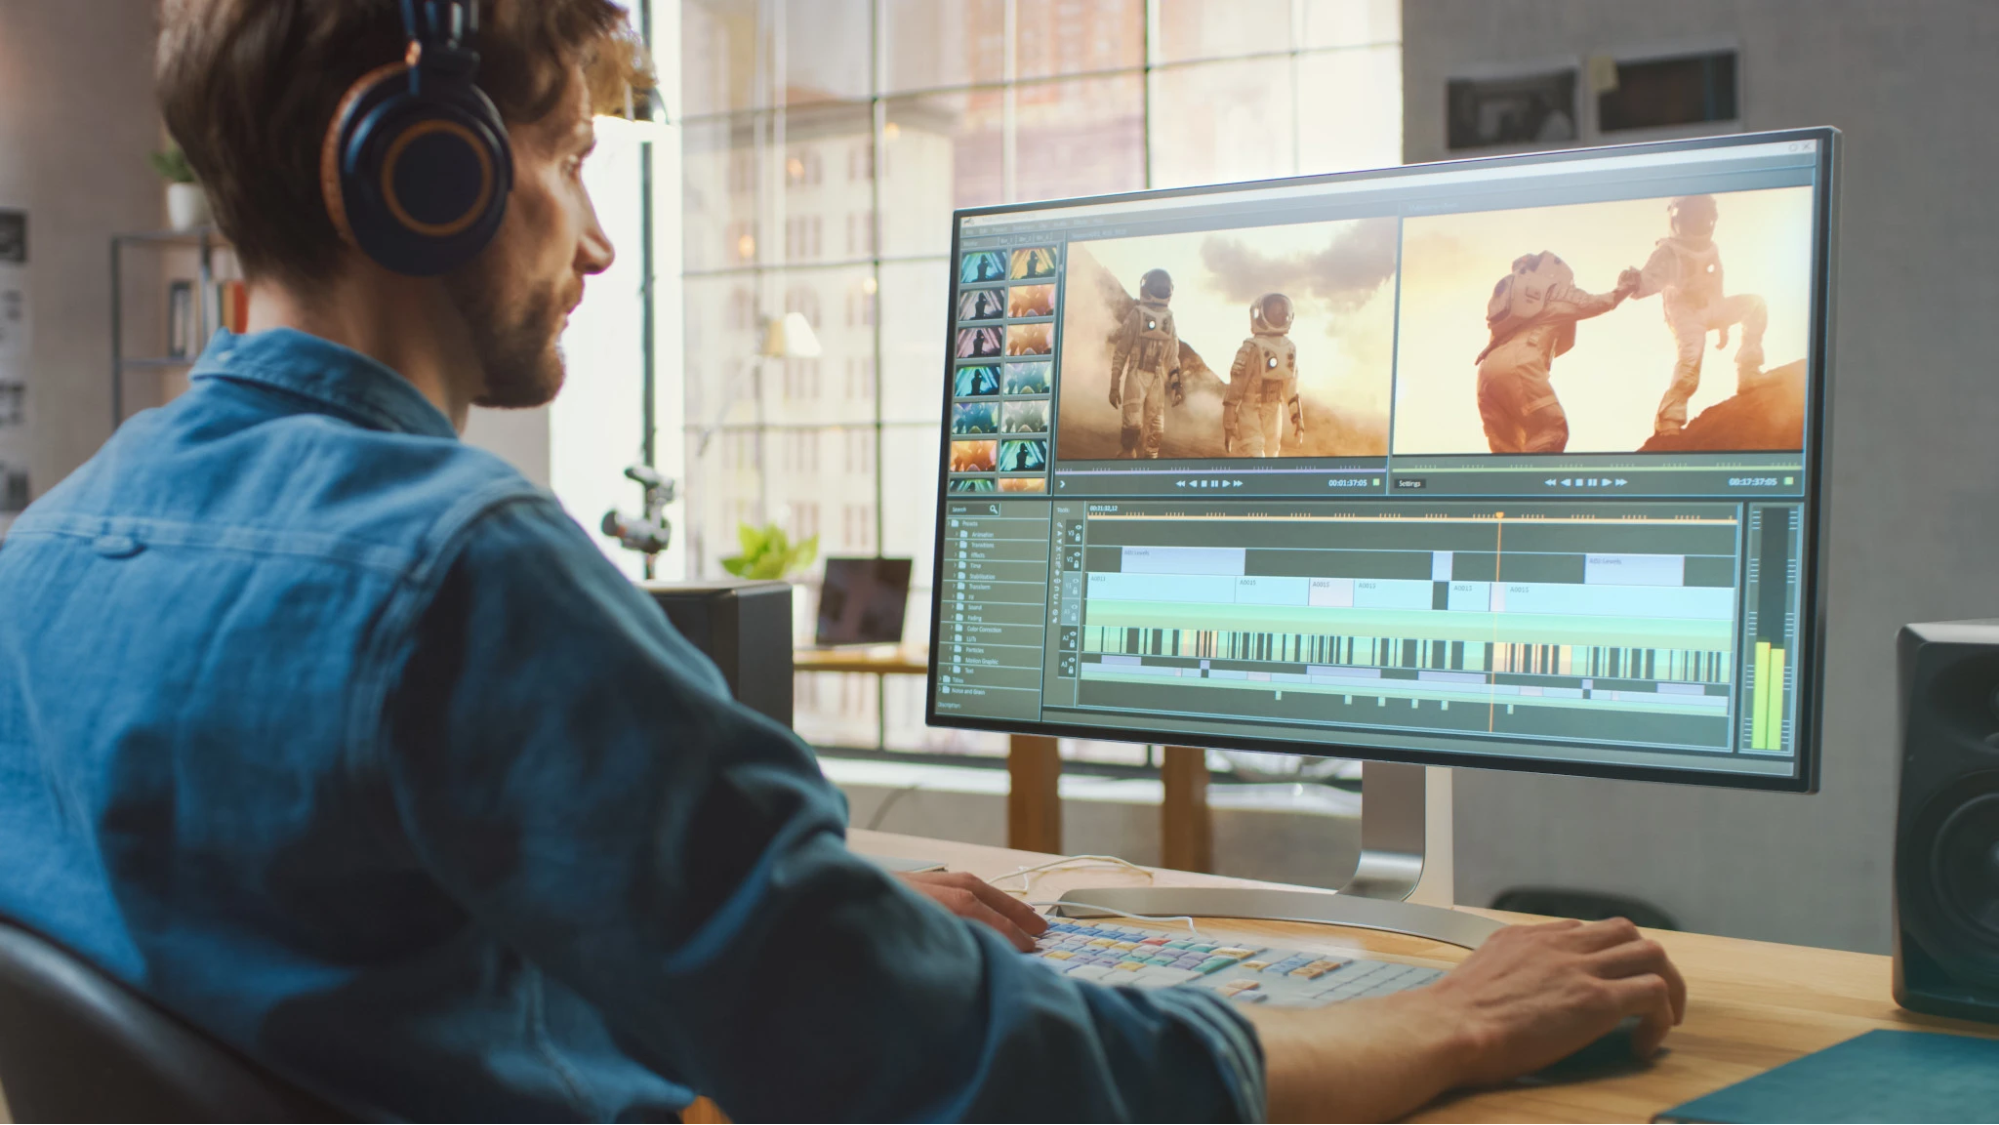 Video Codec 12.1 accelerates video creation and streaming